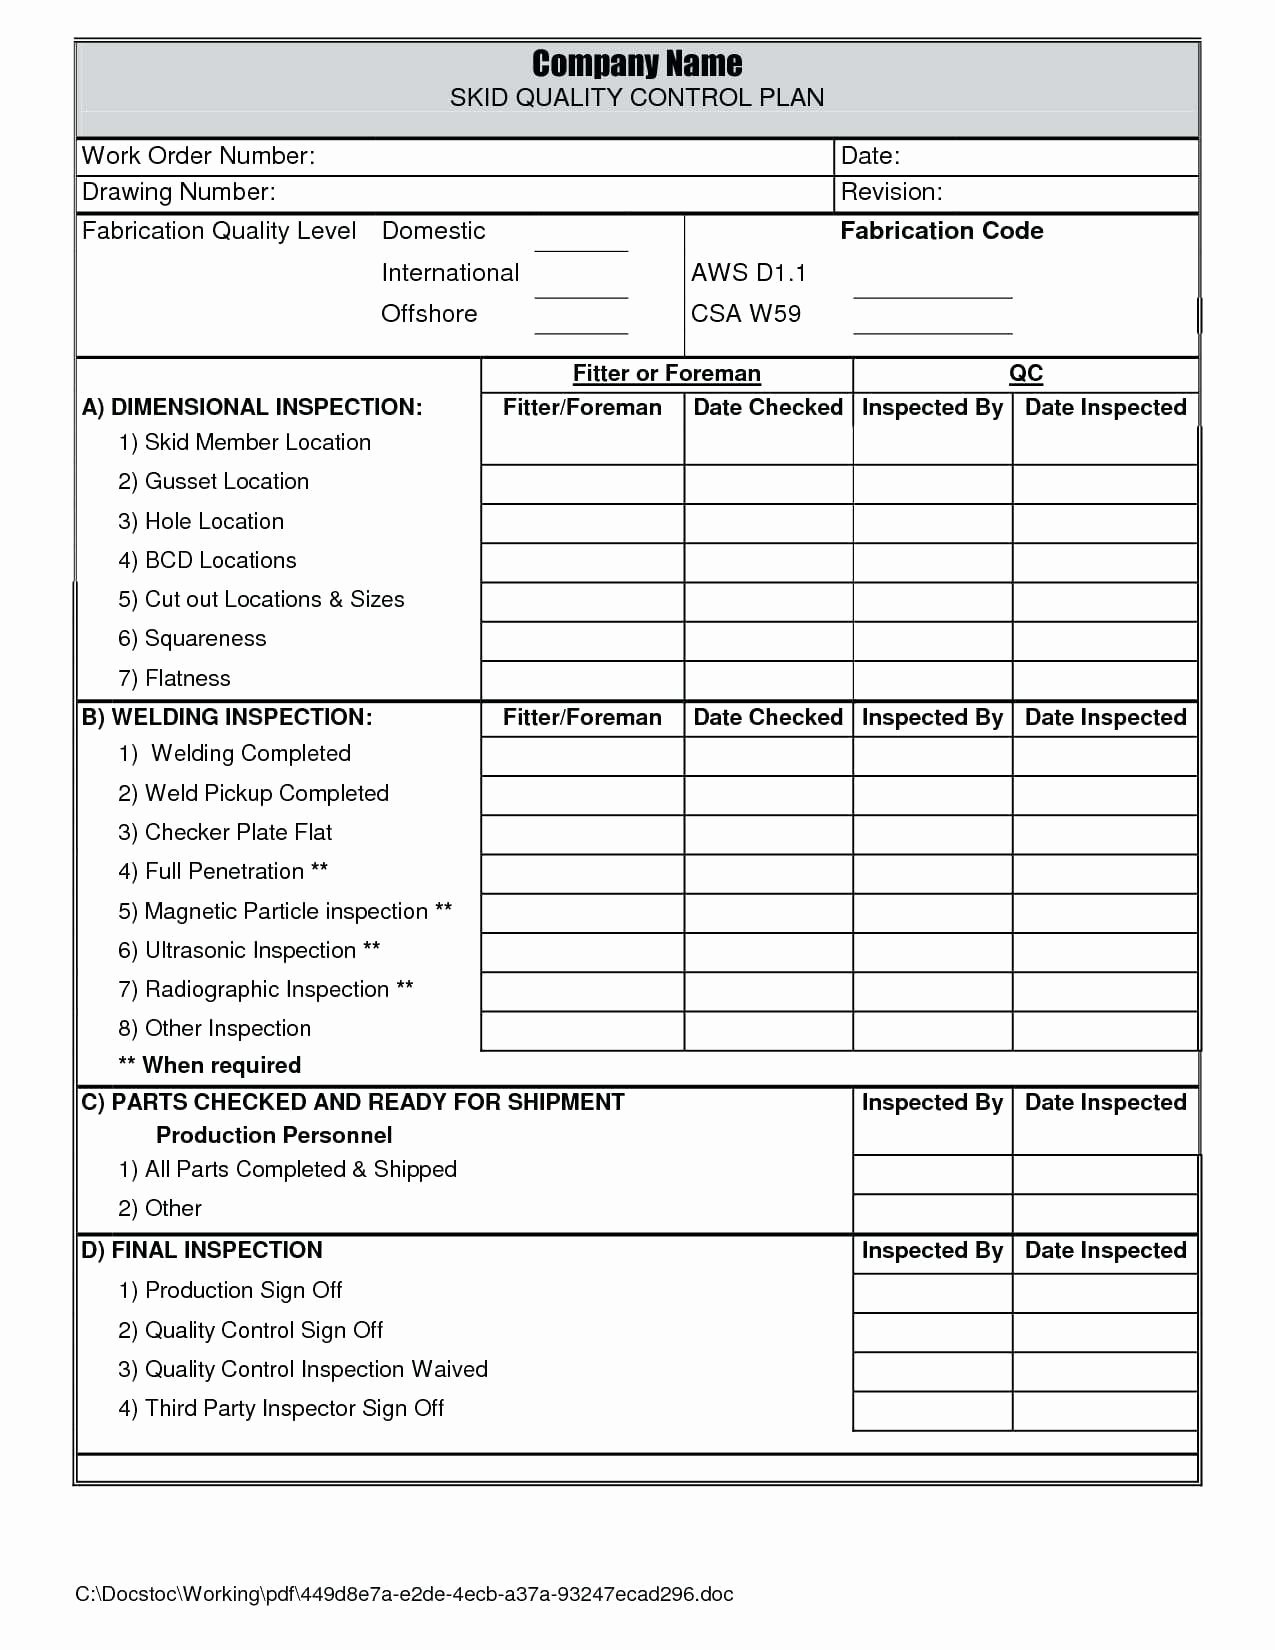 Scope Management Plan Template Inspirational Project Scope Management Plan Example Pdf Basic Project